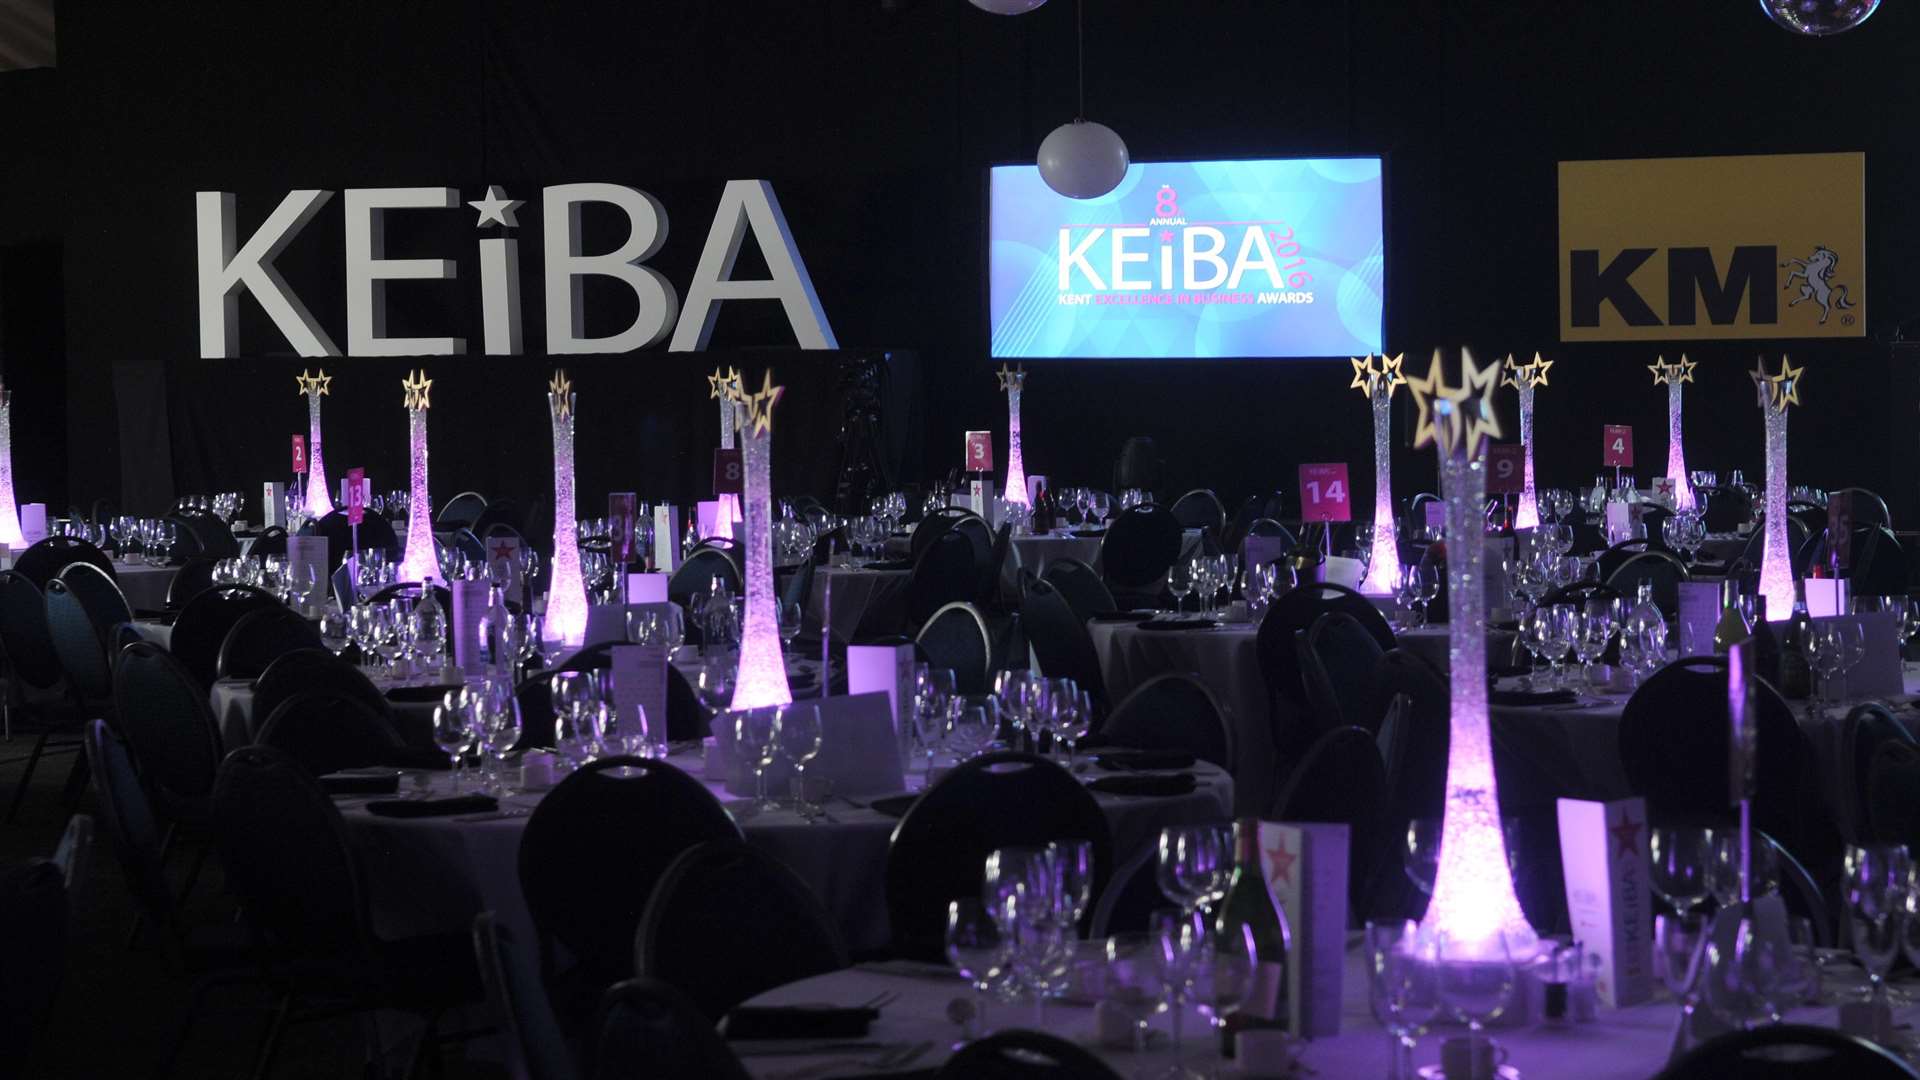 KEiBA takes place at the Kent Event Centre